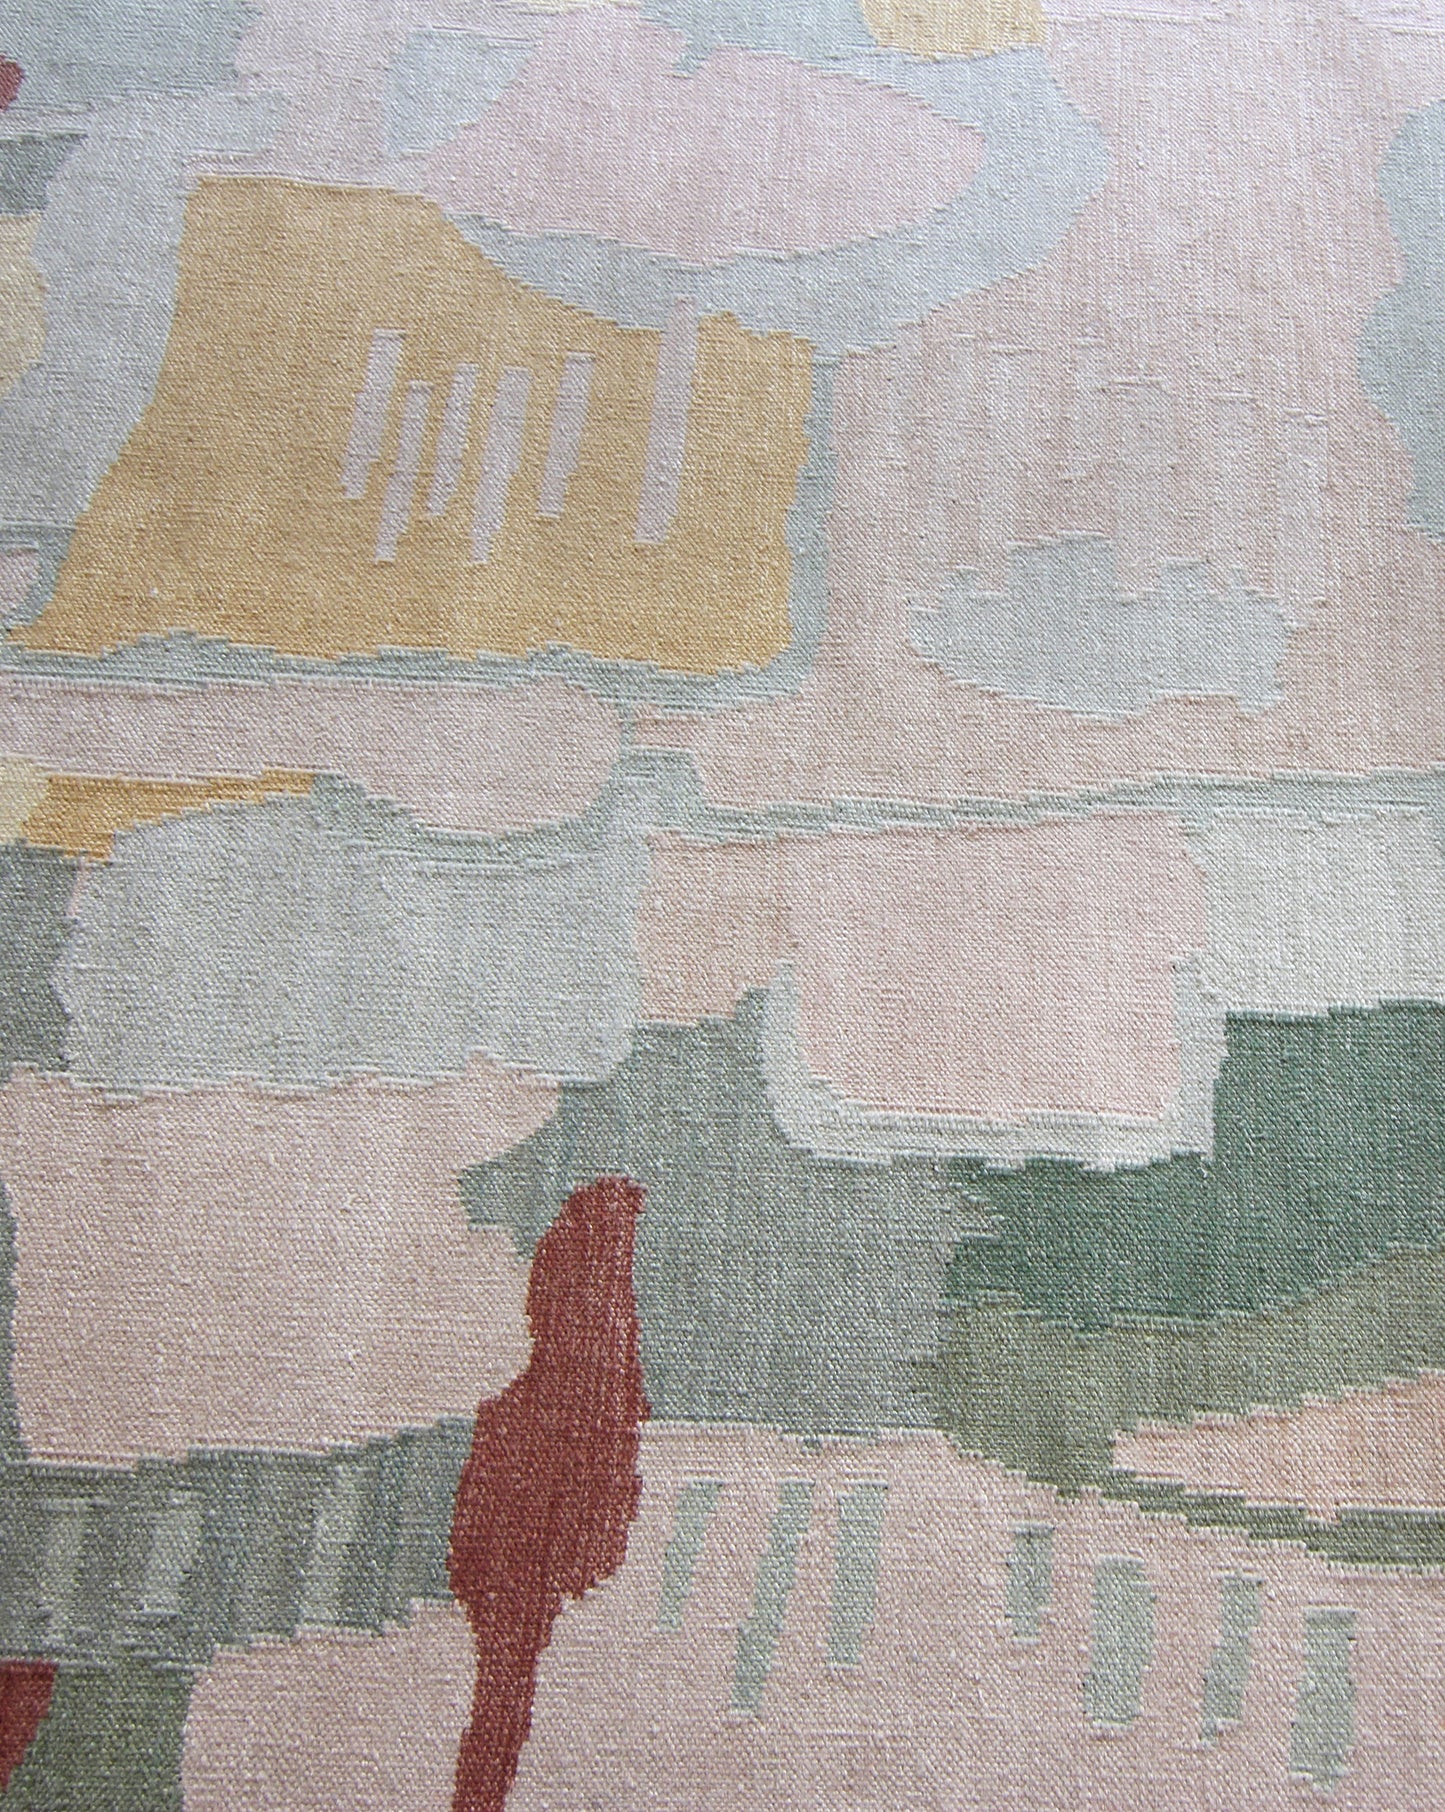 A close up of a Kotoubia Flatweave Rug Karmousse with abstract designs on it